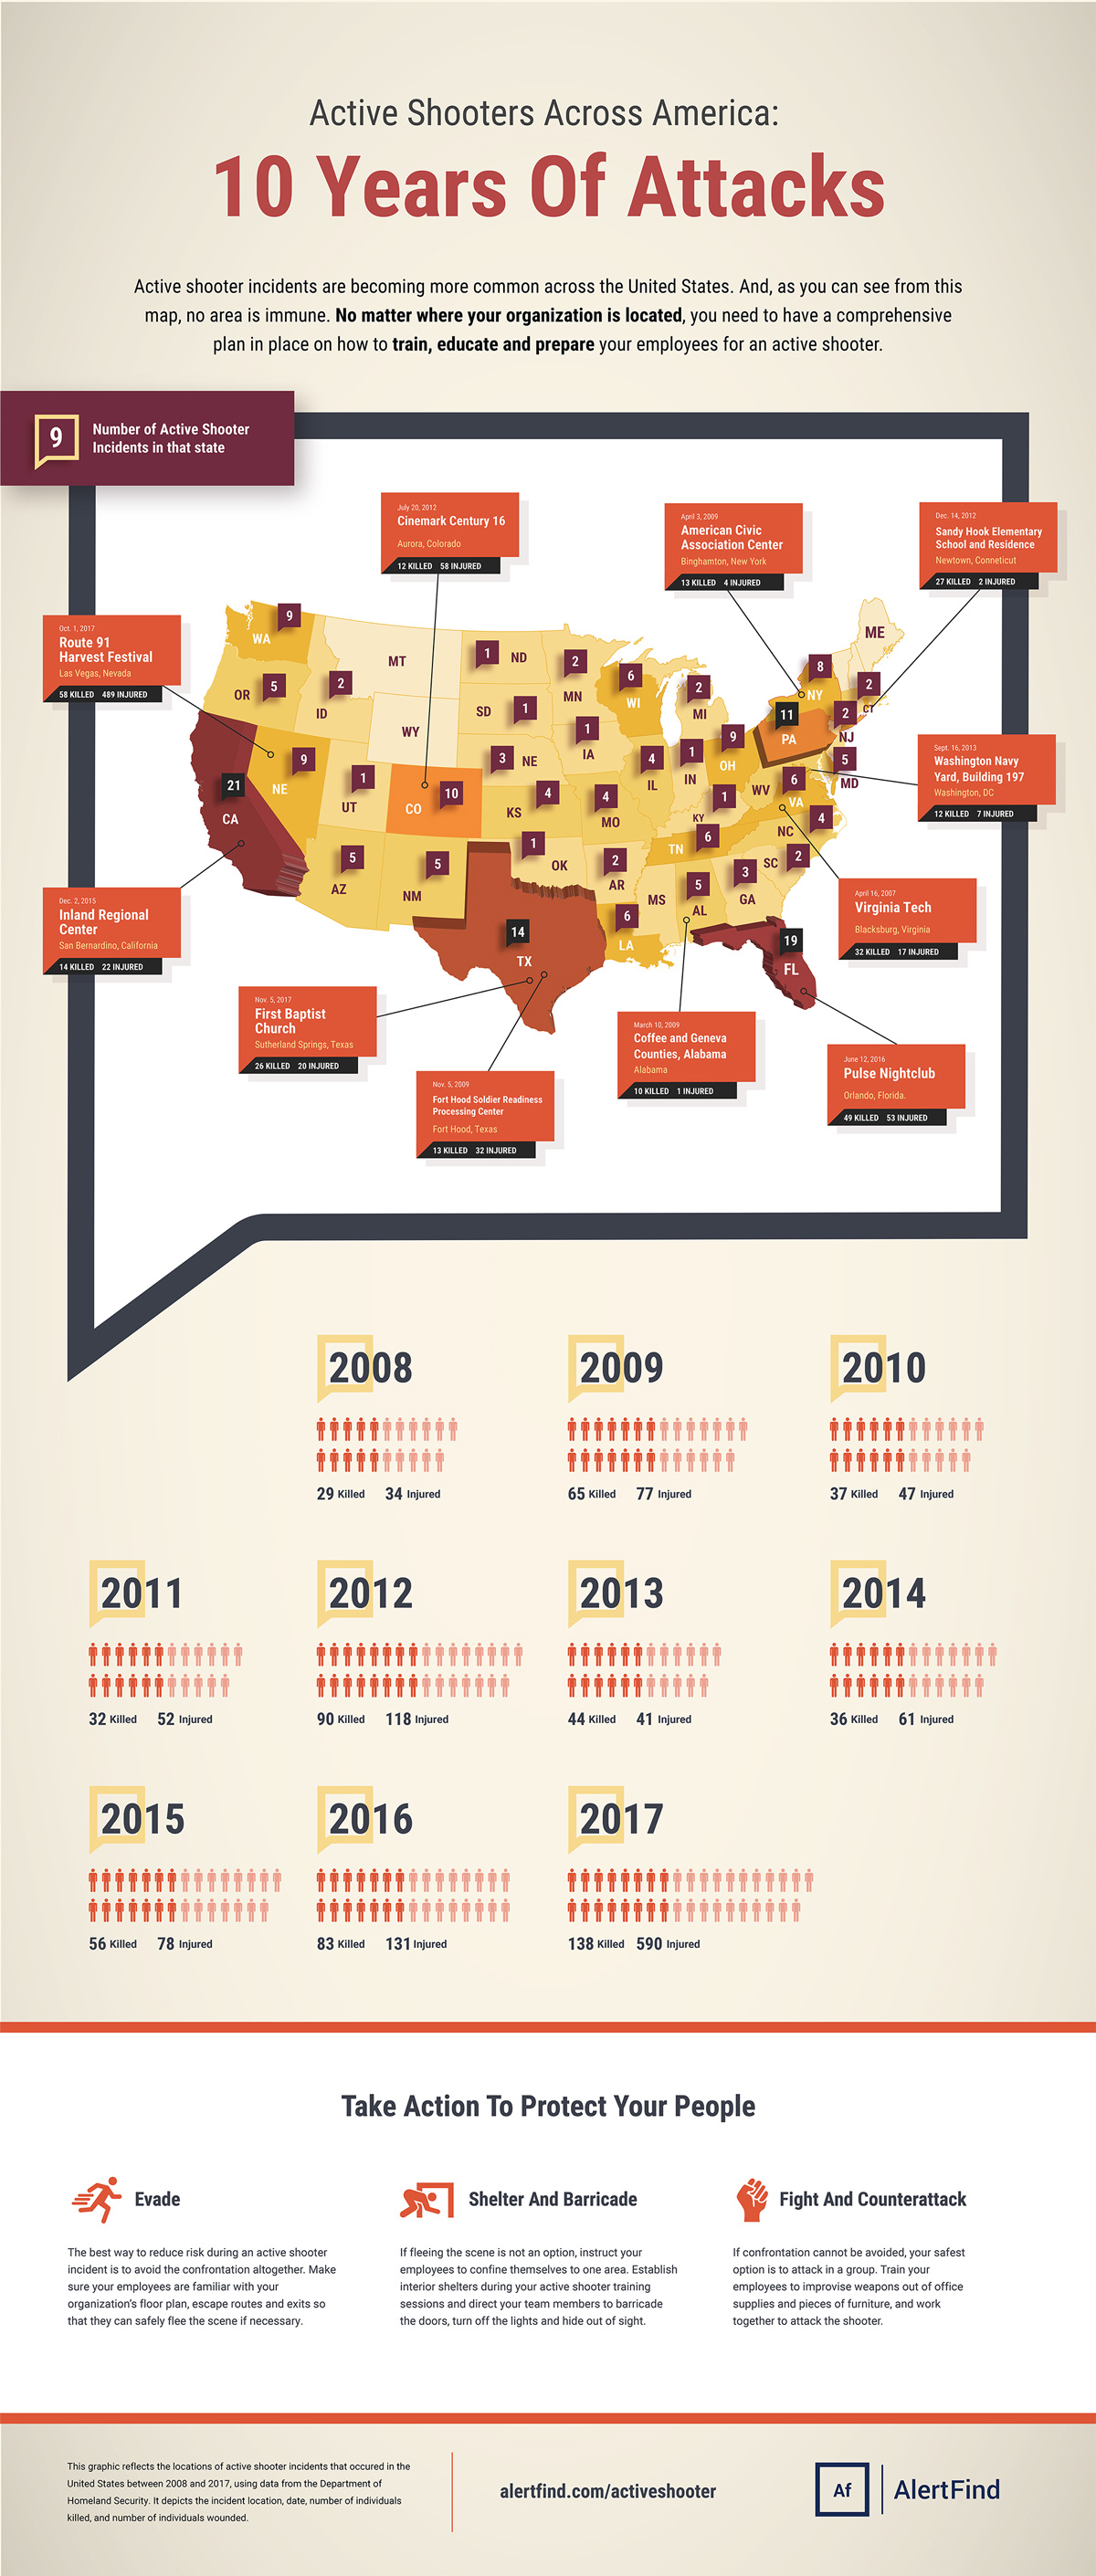 Active Shooters Across America: 10 Years of Attacks